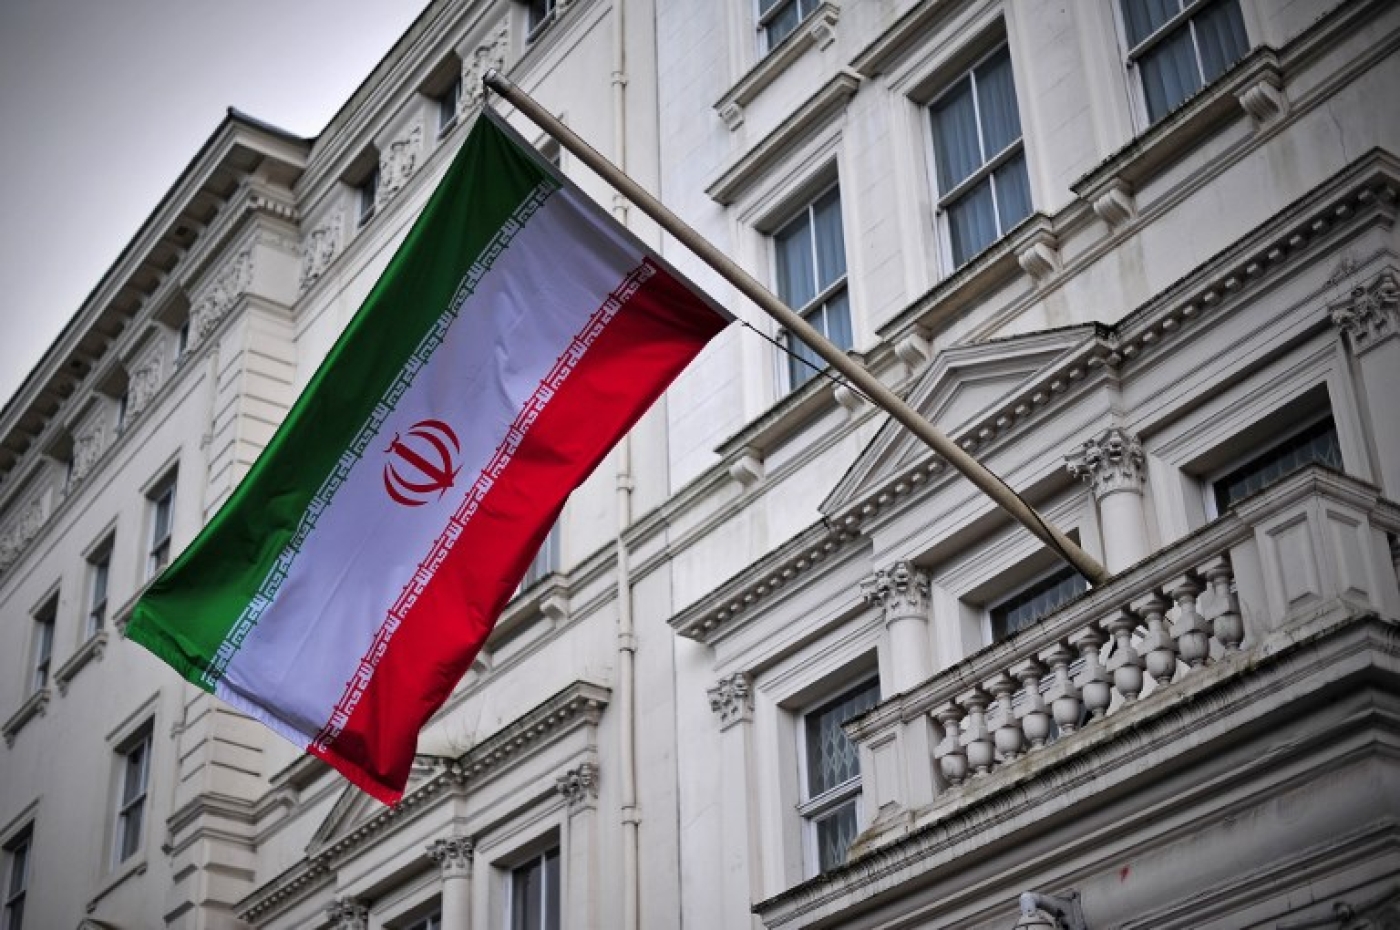 Iran has insisted its aims are entirely peaceful, it has no plans to pursue nuclear weapons.